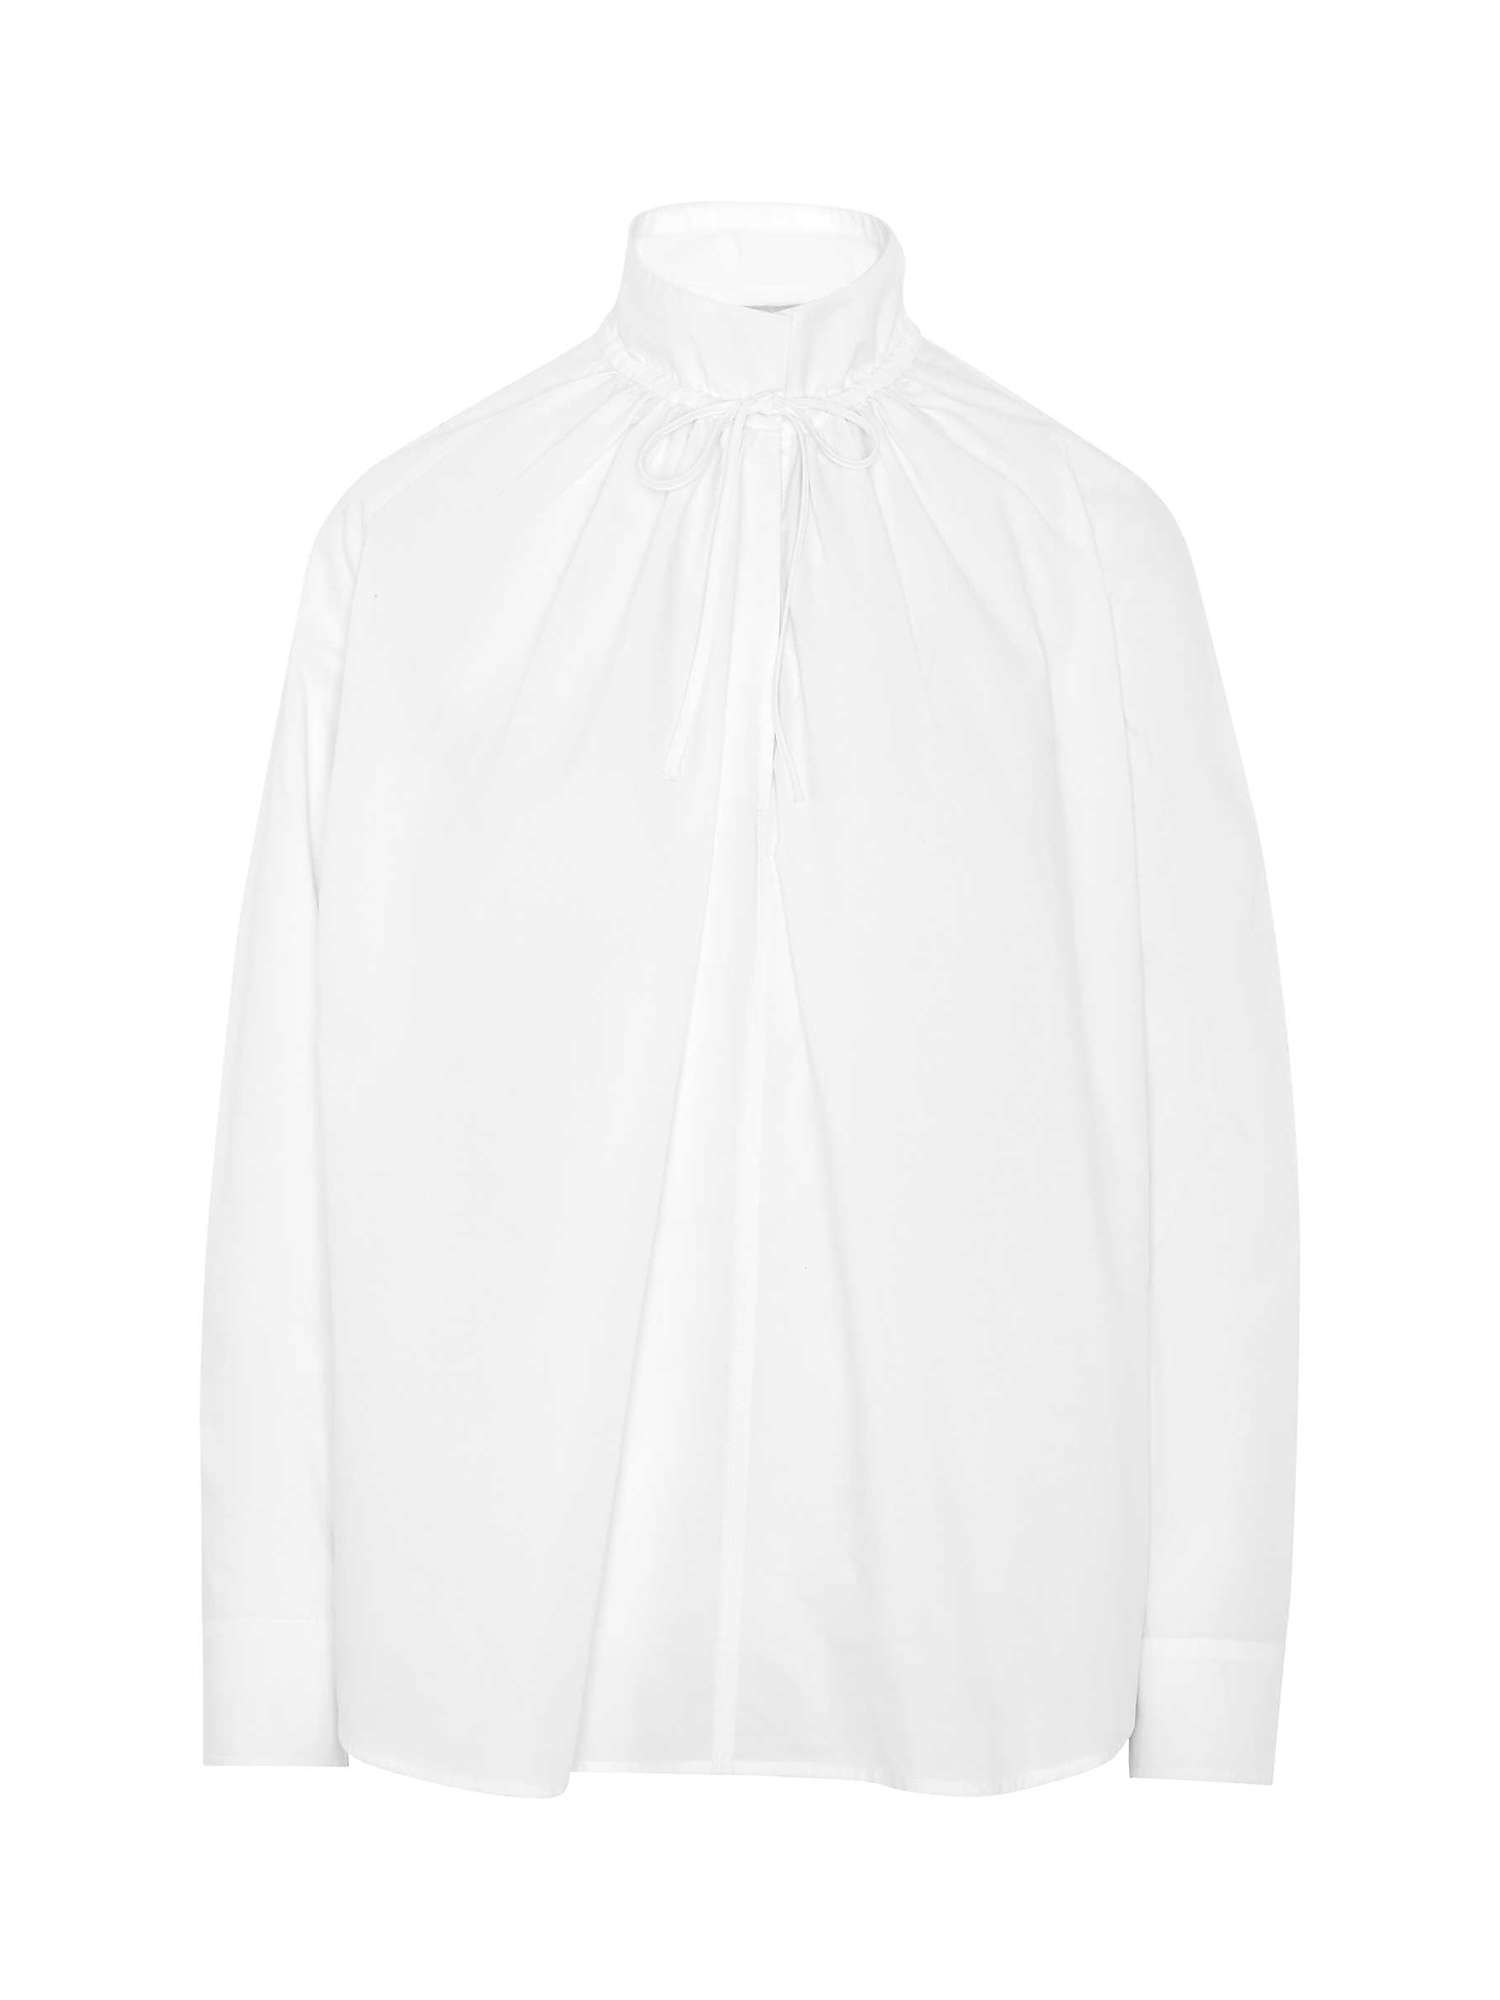 Buy Vivere By Savannah Miller Aria Ruched Cotton Blouse, White Online at johnlewis.com